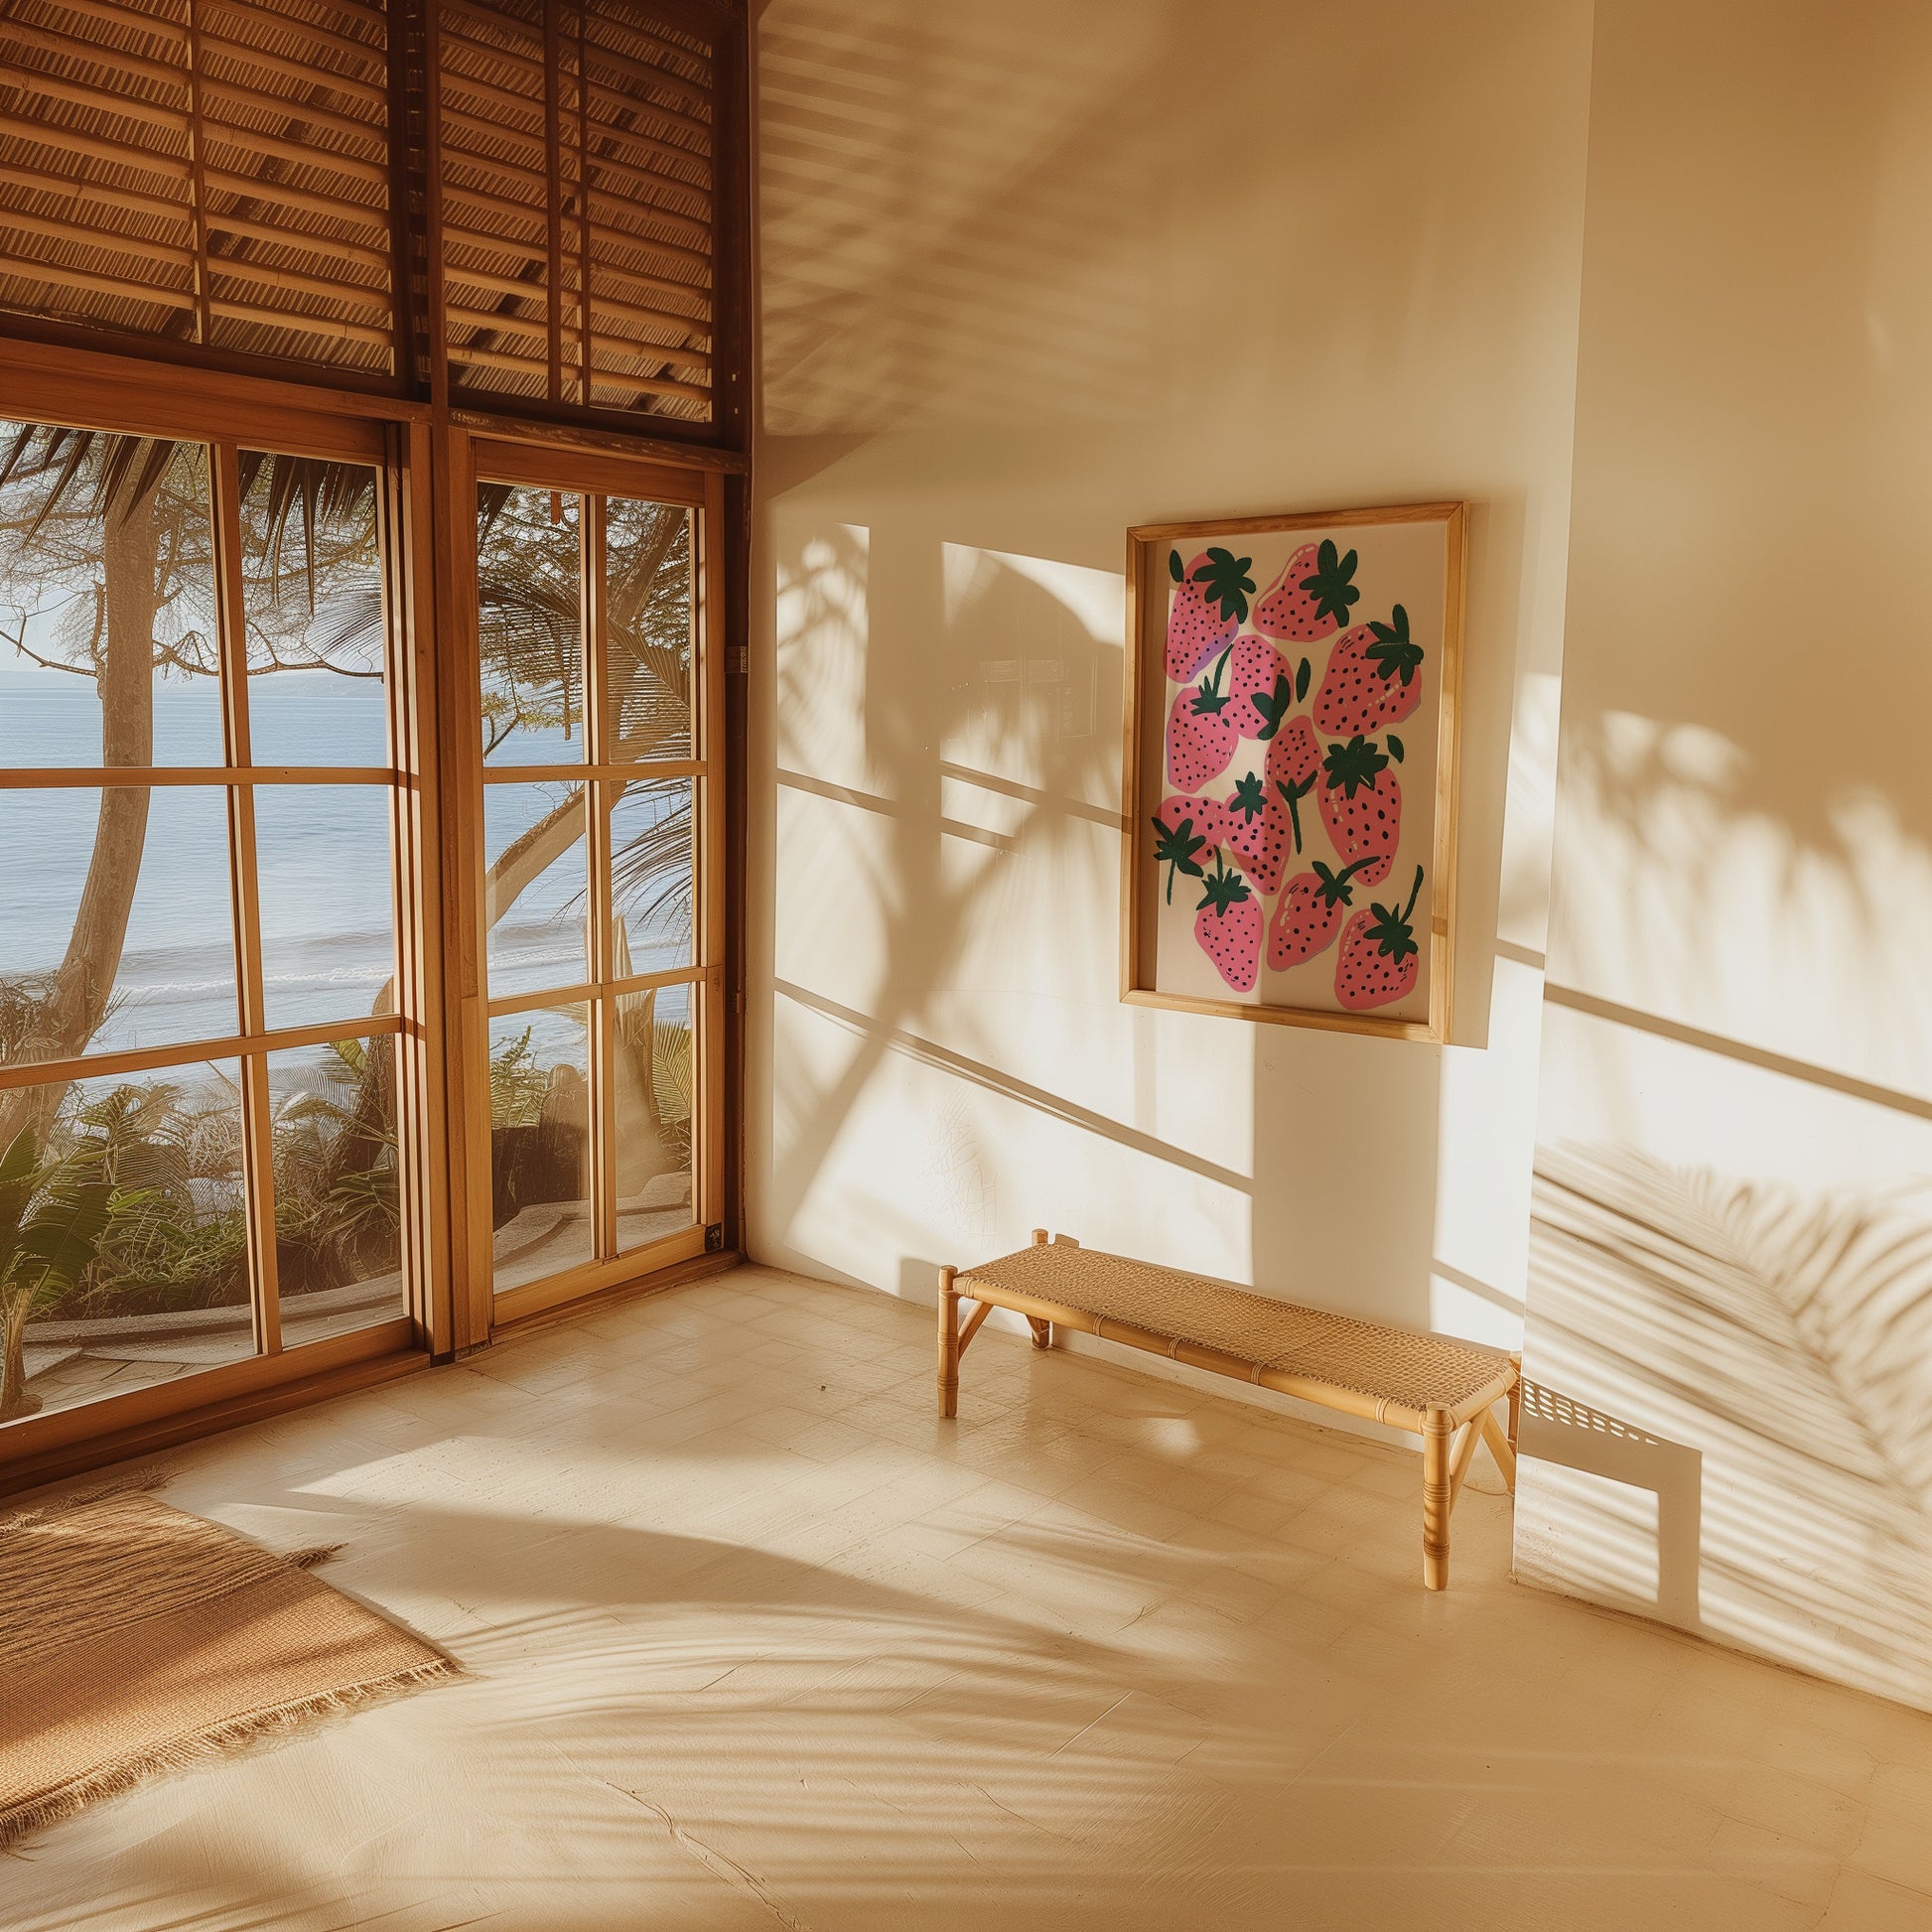 Sunny room with a large window overlooking the sea, a bench, and a strawberry-themed artwork on the wall.